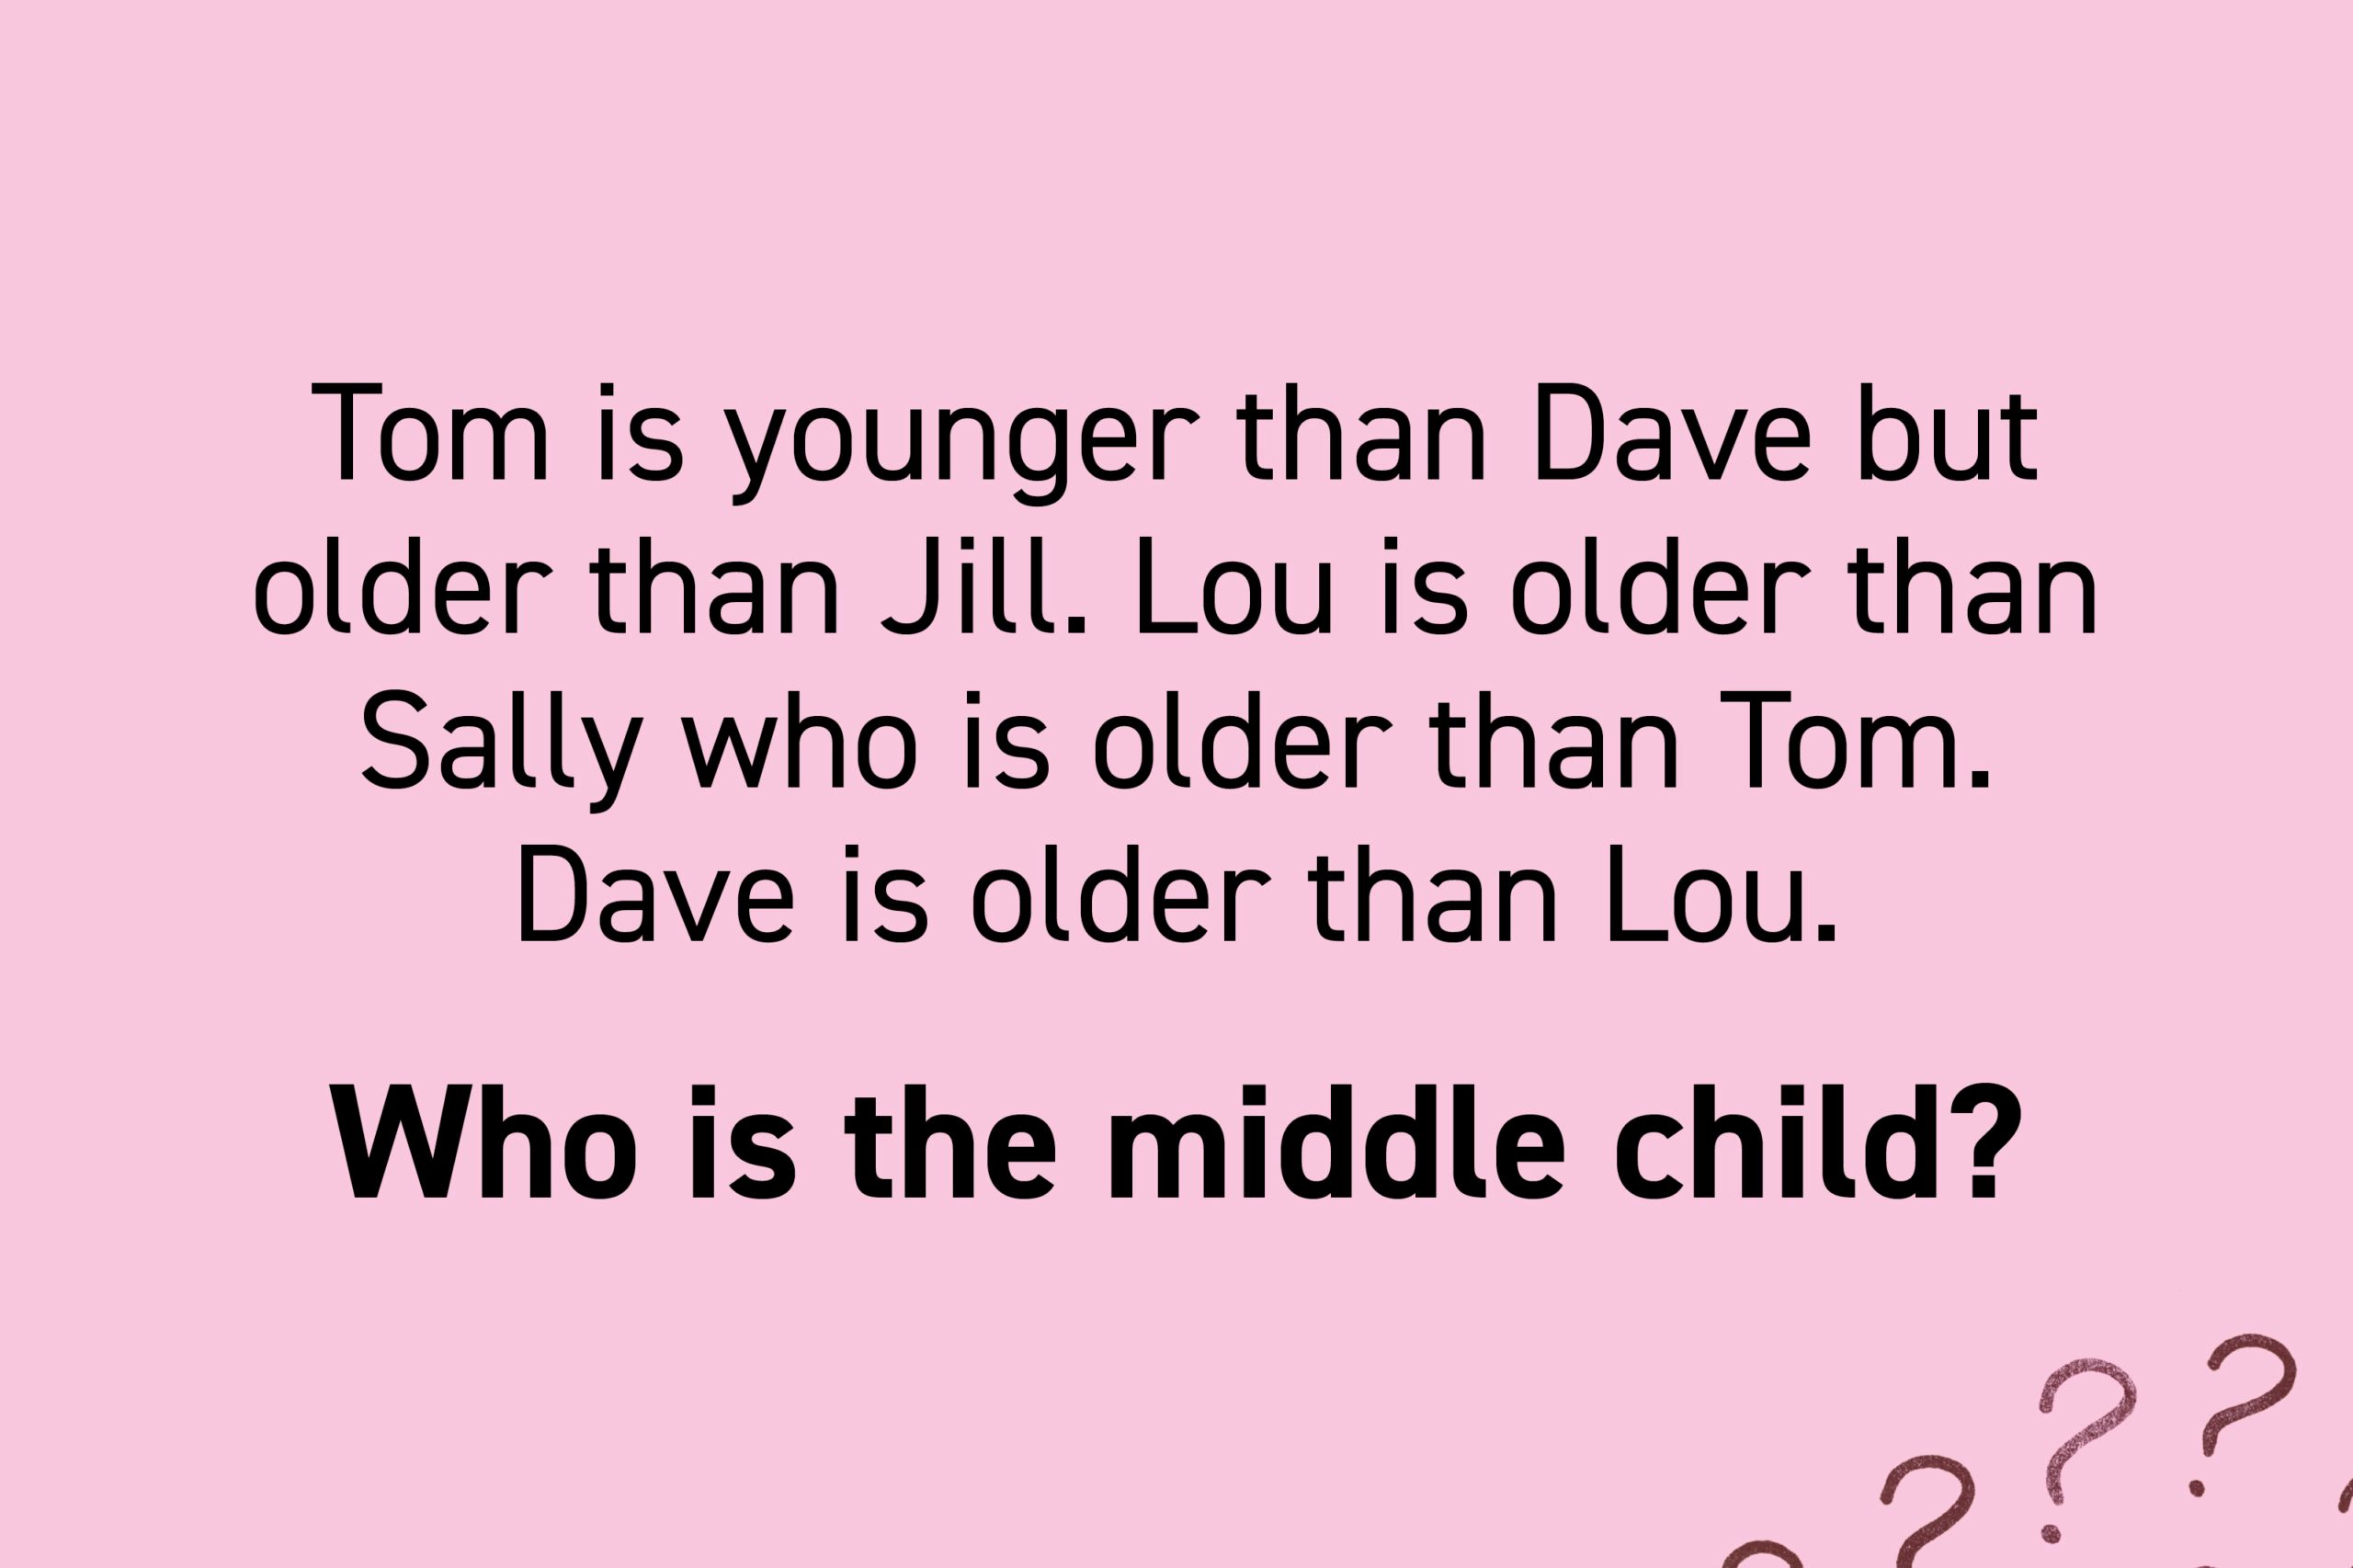 Tom is younger than Dave but older than Jill. Lou is older than Sally who is older than Tom. Dave is older than Lou. Who is the middle child?